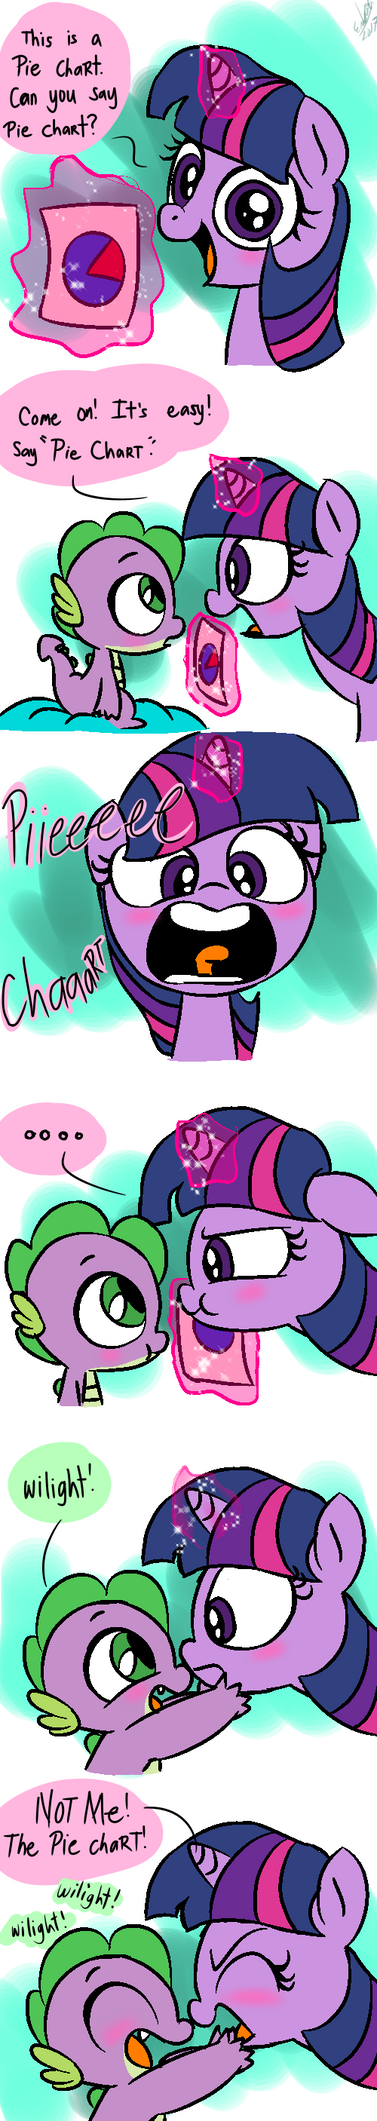 the_wilight_language_by_emositecc-dbuanko.png